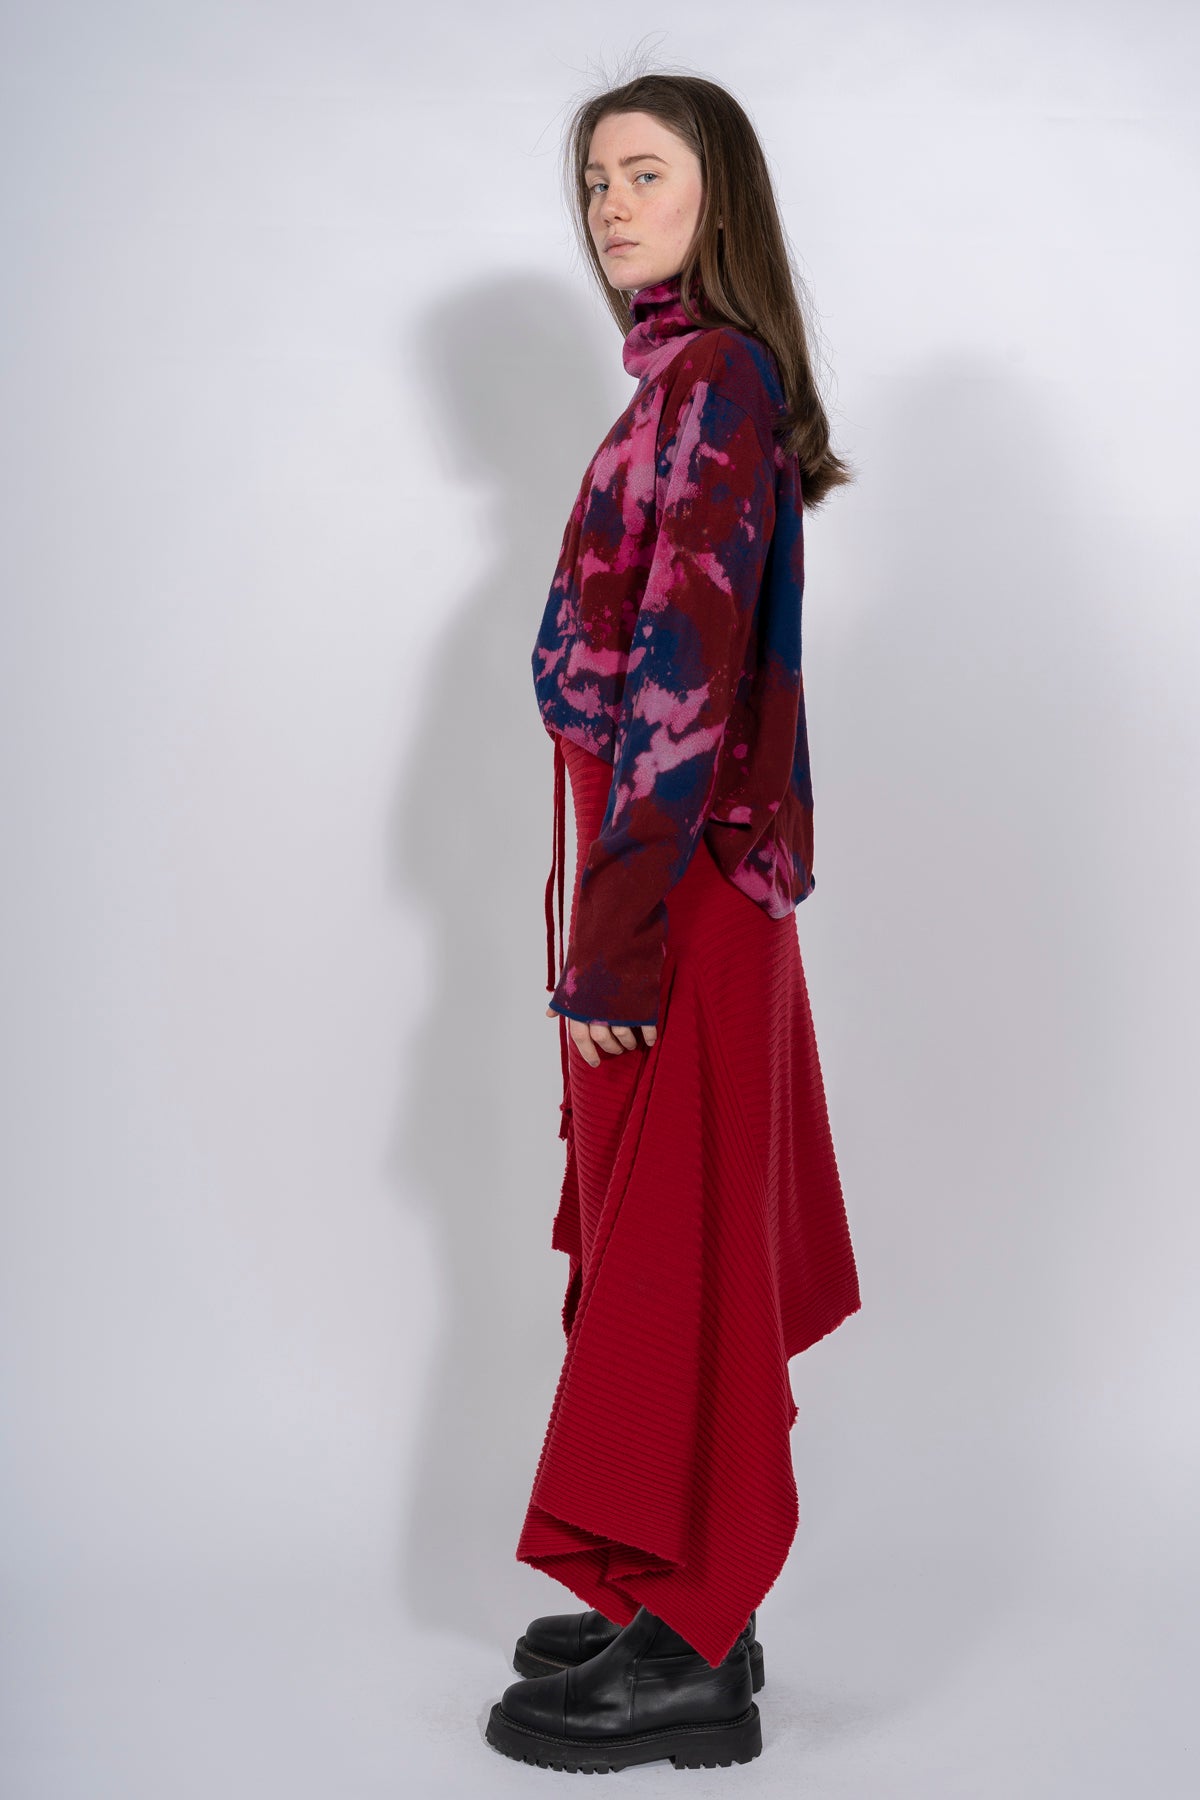 CLASSIC M'A MERINO SKIRT IN RED marques almeida